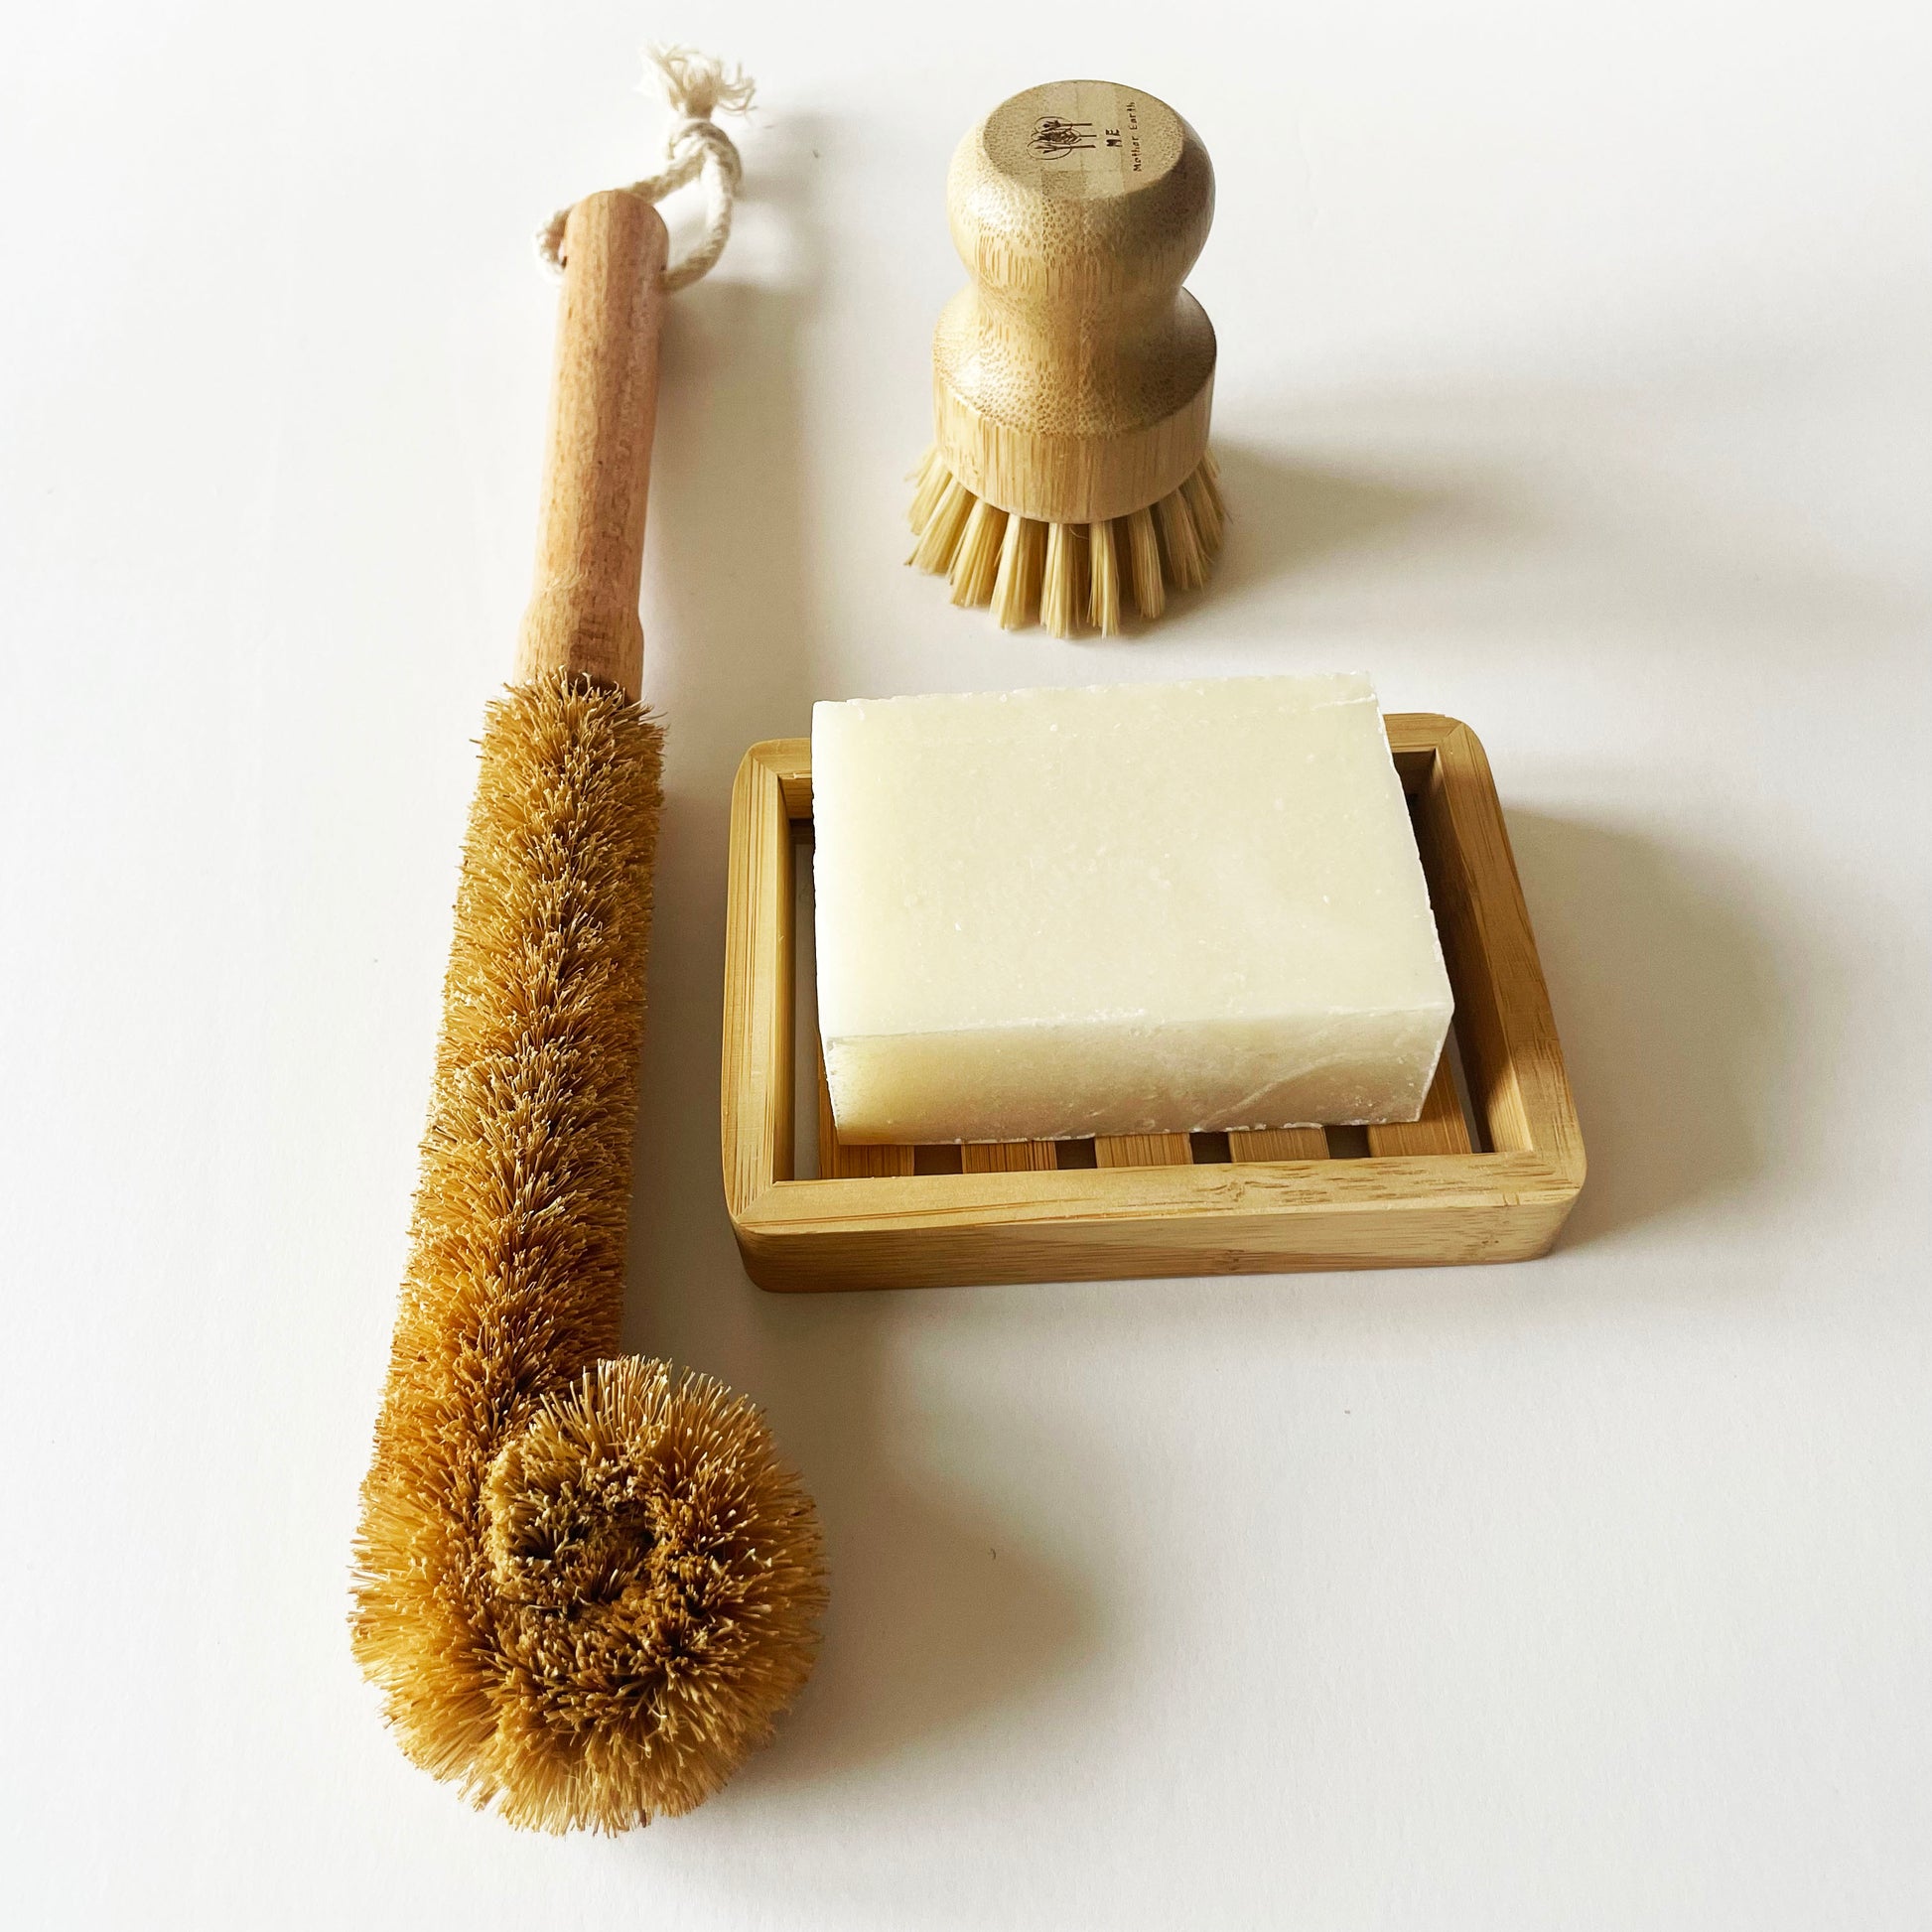 bottle cleaning brush, hand cleaning brush, dish soap bar, bamboo soap dish, sisal, coconut oil